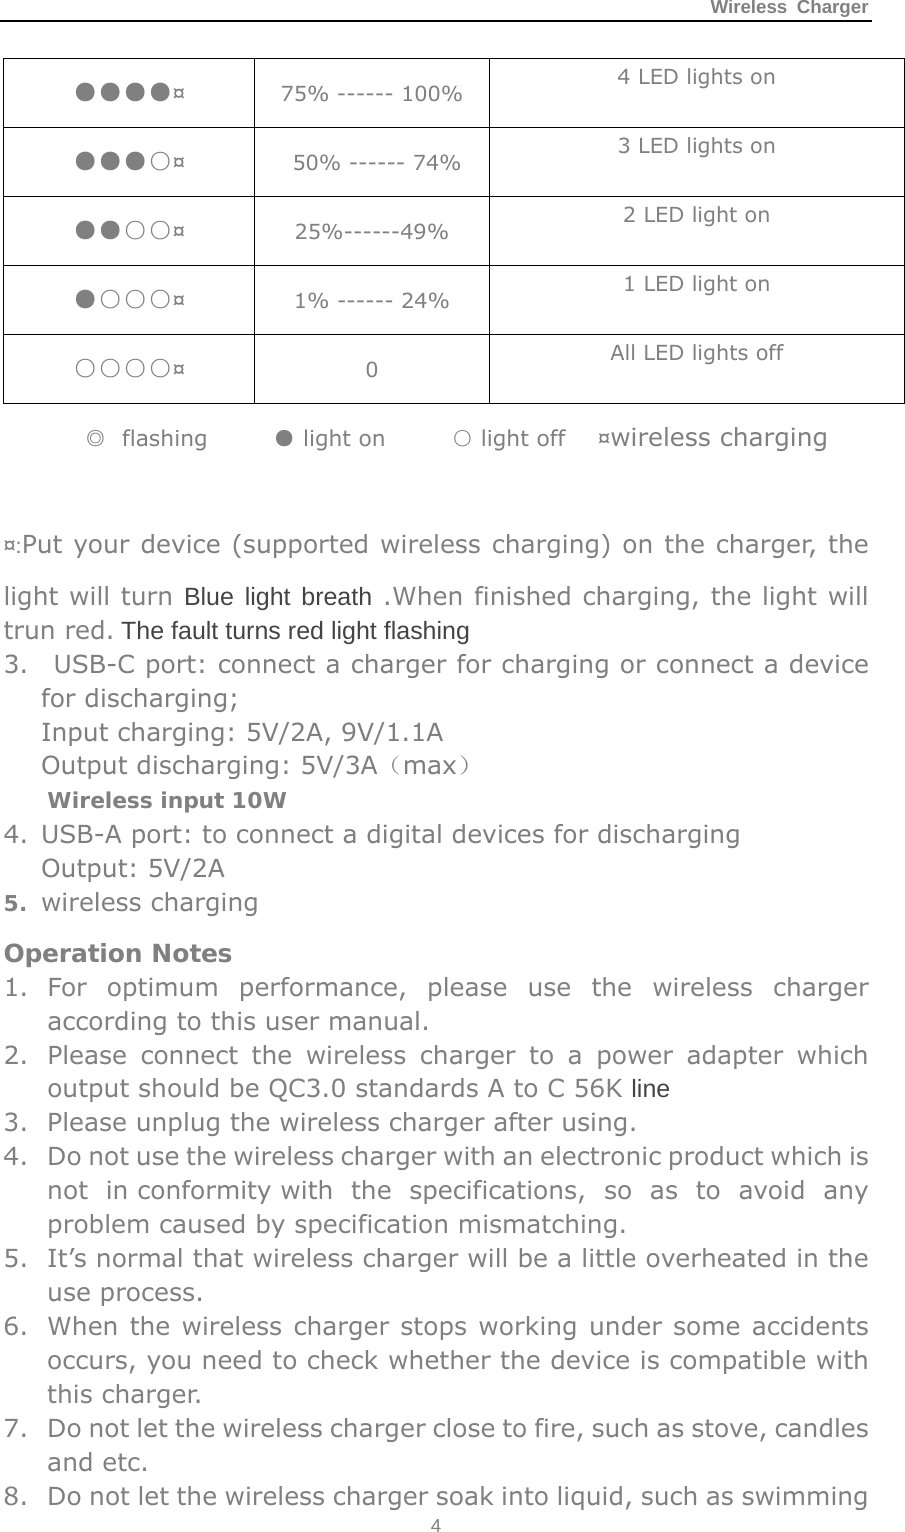 Wireless Charger 4  ●●●●¤ 75% ------ 100%  4 LED lights on ●●●○¤   50% ------ 74%  3 LED lights on ●●○○¤ 25%------49%  2 LED light on ●○○○¤ 1% ------ 24%  1 LED light on   ○○○○¤ 0  All LED lights off ◎  flashing      ● light on      ○ light off      ¤wireless charging  ¤:Put your device (supported wireless charging) on the charger, the light will turn Blue light breath .When finished charging, the light will trun red. The fault turns red light flashing 3.  USB-C port: connect a charger for charging or connect a device for discharging; Input charging: 5V/2A, 9V/1.1A   Output discharging: 5V/3A（max）   Wireless input 10W 4. USB-A port: to connect a digital devices for discharging Output: 5V/2A 5. wireless charging Operation Notes 1. For optimum performance, please use the wireless charger according to this user manual. 2. Please connect the wireless charger to a power adapter which output should be QC3.0 standards A to C 56K line 3. Please unplug the wireless charger after using. 4. Do not use the wireless charger with an electronic product which is not in conformity with the specifications, so as to avoid any problem caused by specification mismatching. 5. It’s normal that wireless charger will be a little overheated in the use process. 6. When the wireless charger stops working under some accidents occurs, you need to check whether the device is compatible with this charger. 7. Do not let the wireless charger close to fire, such as stove, candles and etc. 8. Do not let the wireless charger soak into liquid, such as swimming 